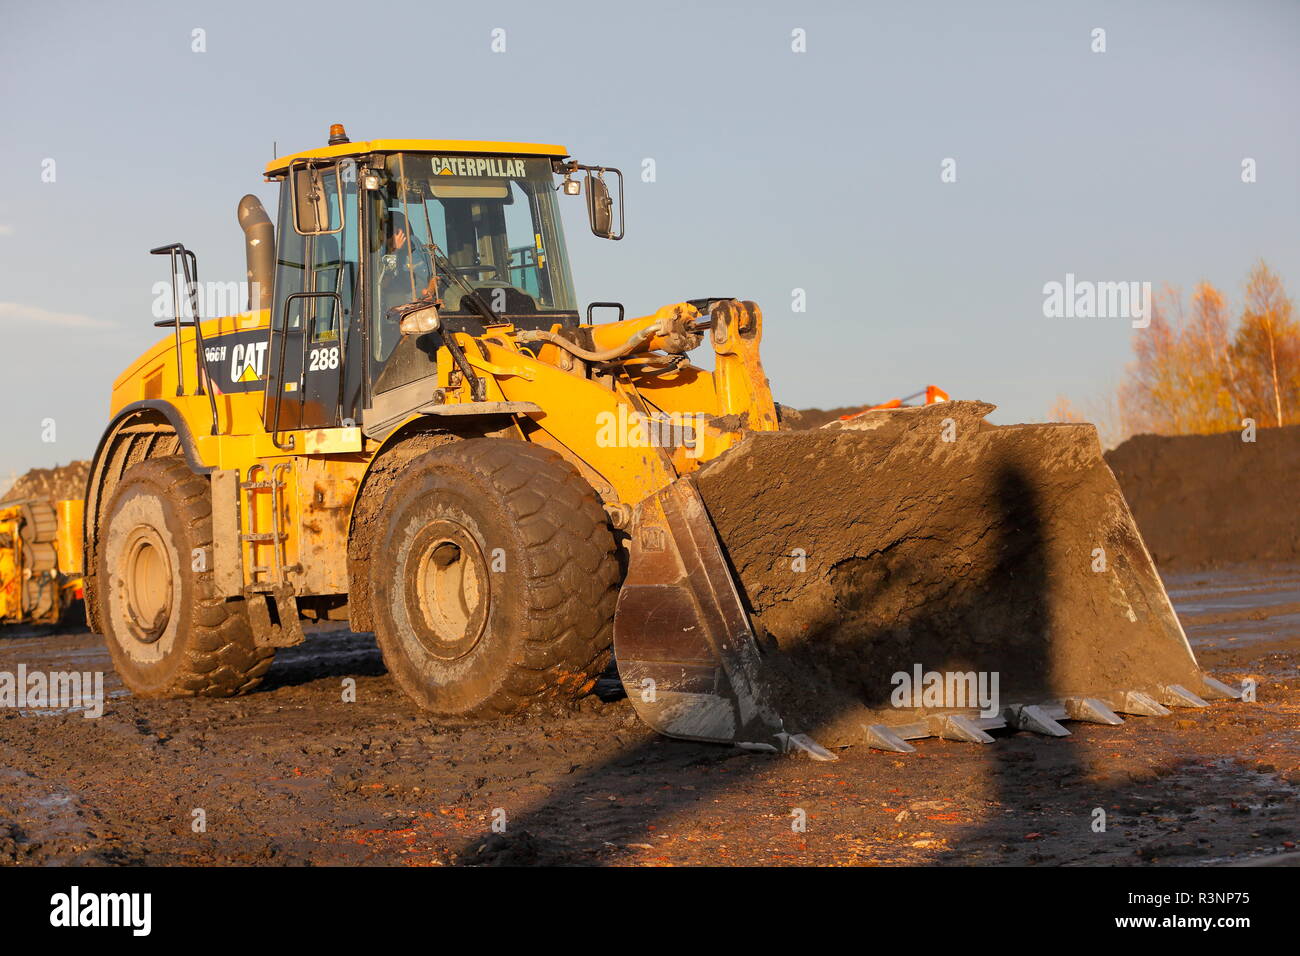 A Caterpillar wheeled loading shovel on the Recycoal,Coal Recycling site in Rossington,Doncaster that are used for loading trucks and freight trains. Stock Photo